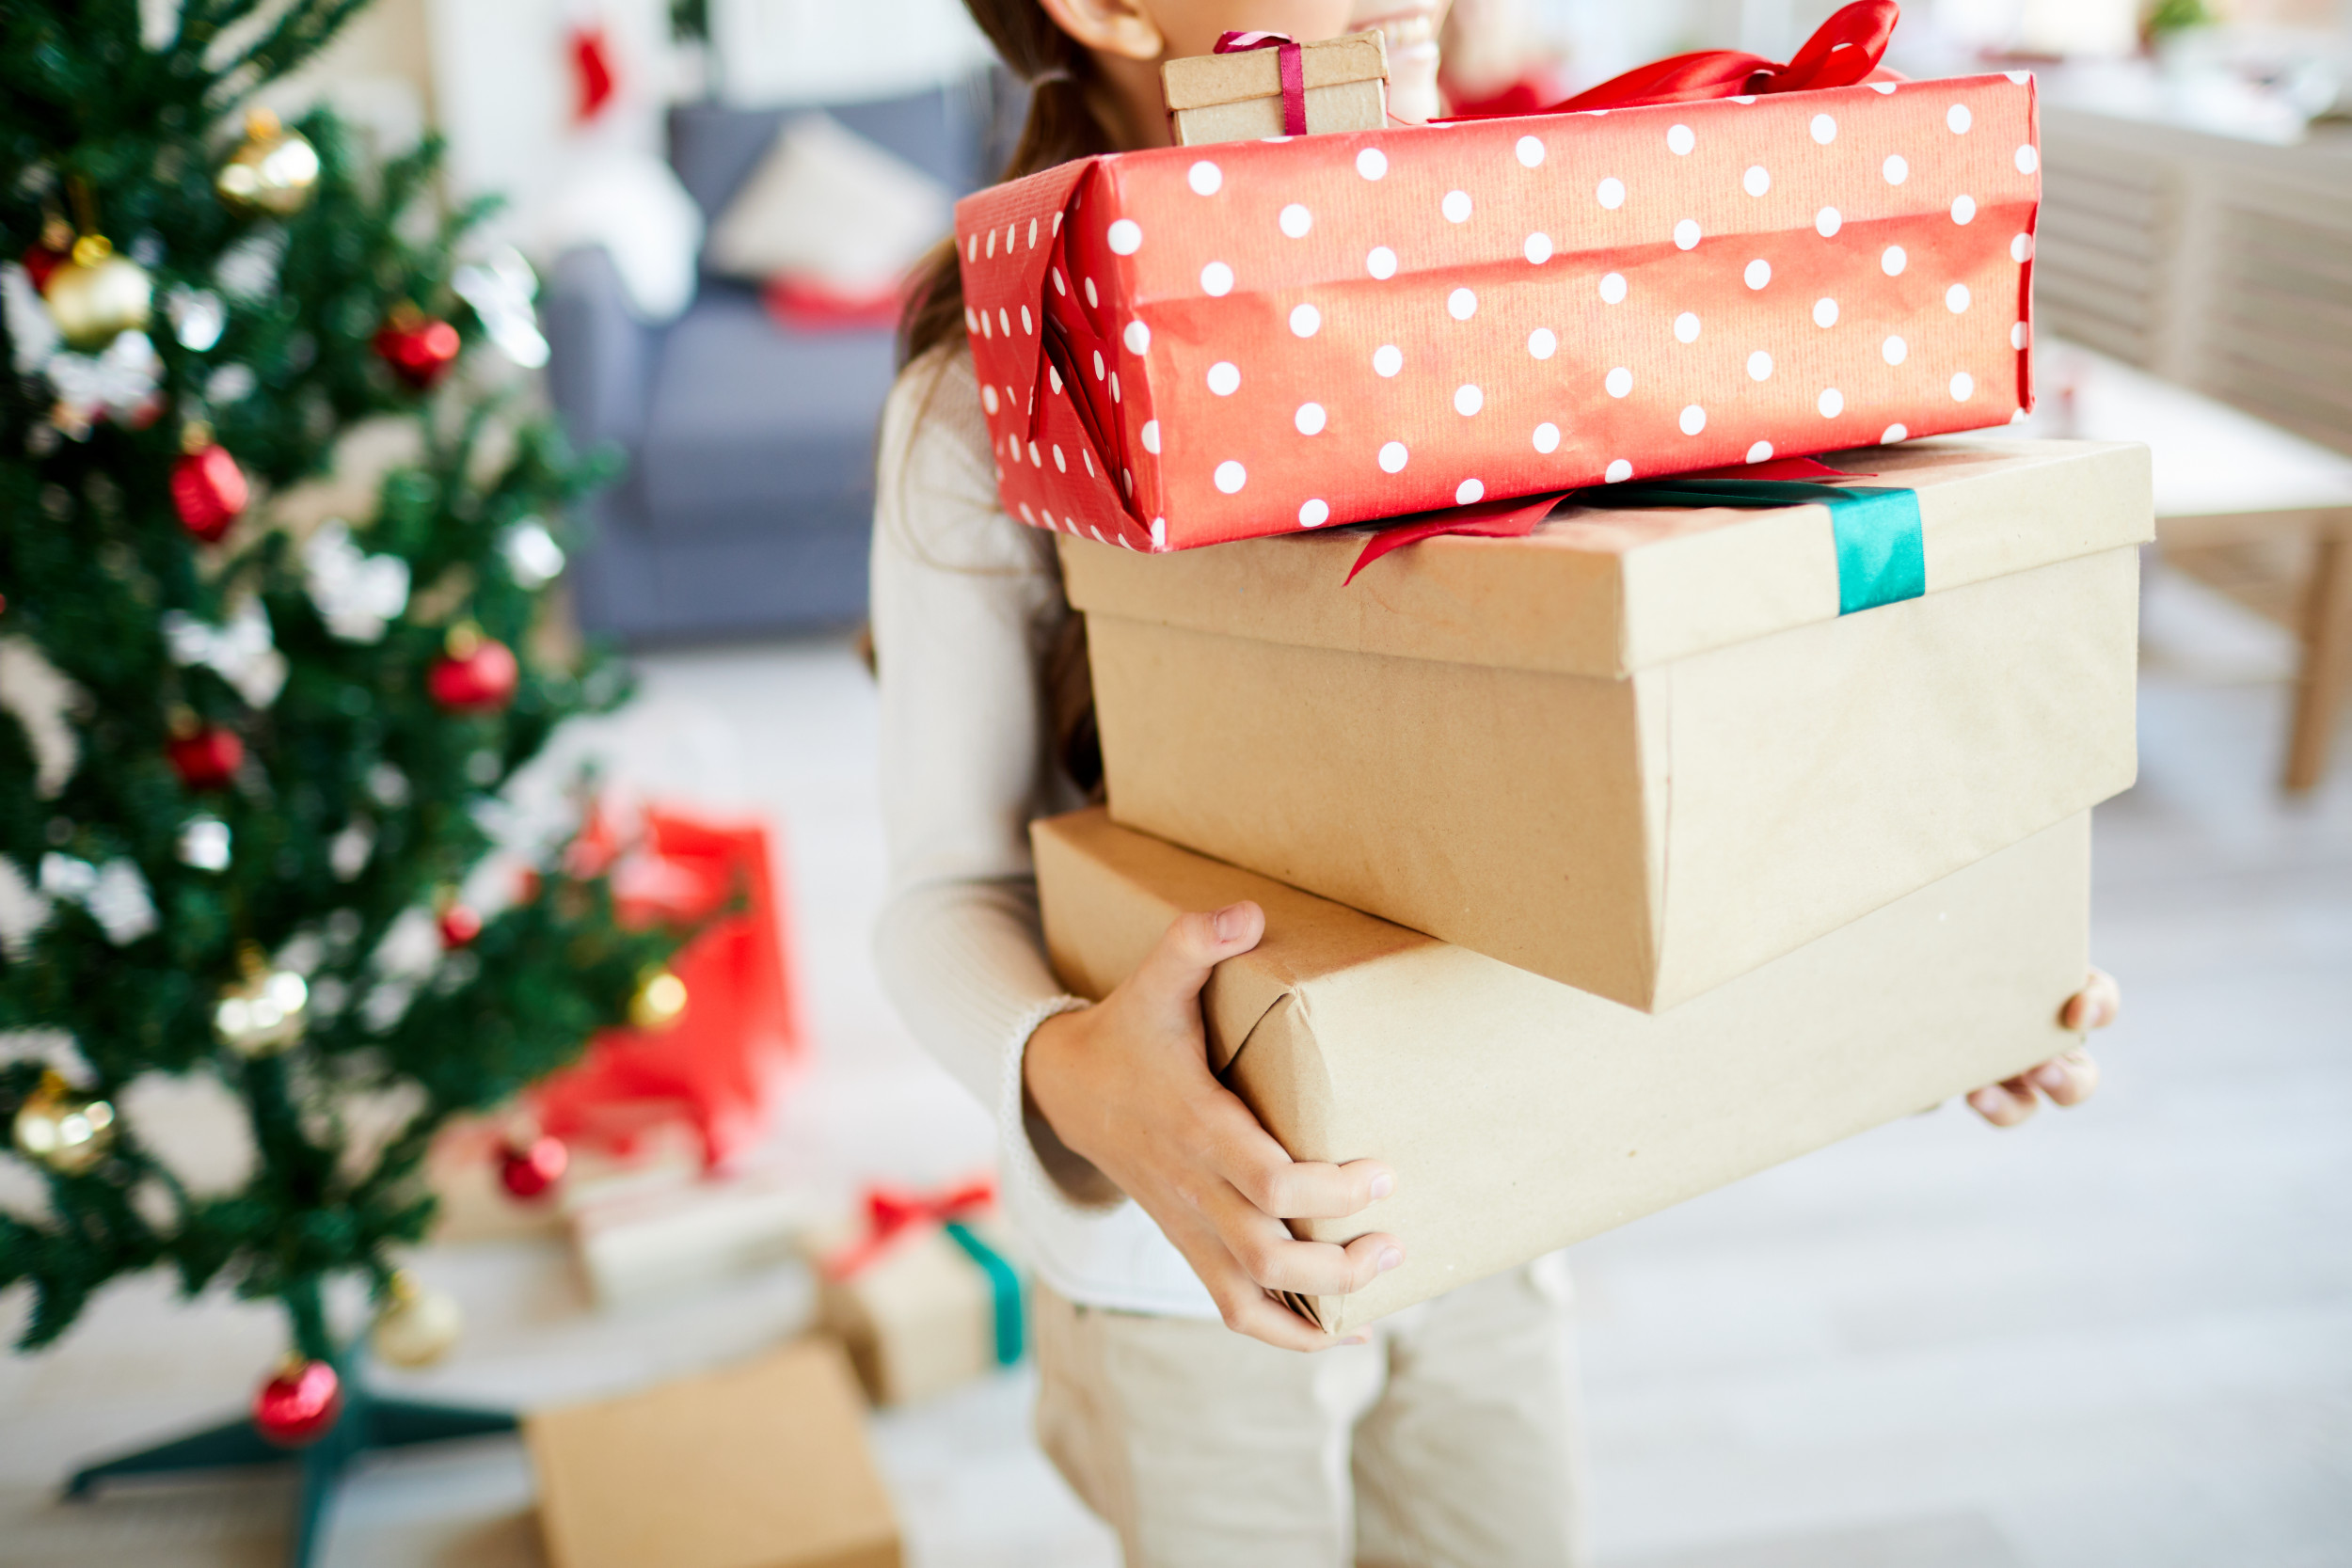 Mismo Discurso Cabra How Many Christmas Presents Should You Buy Your Children?